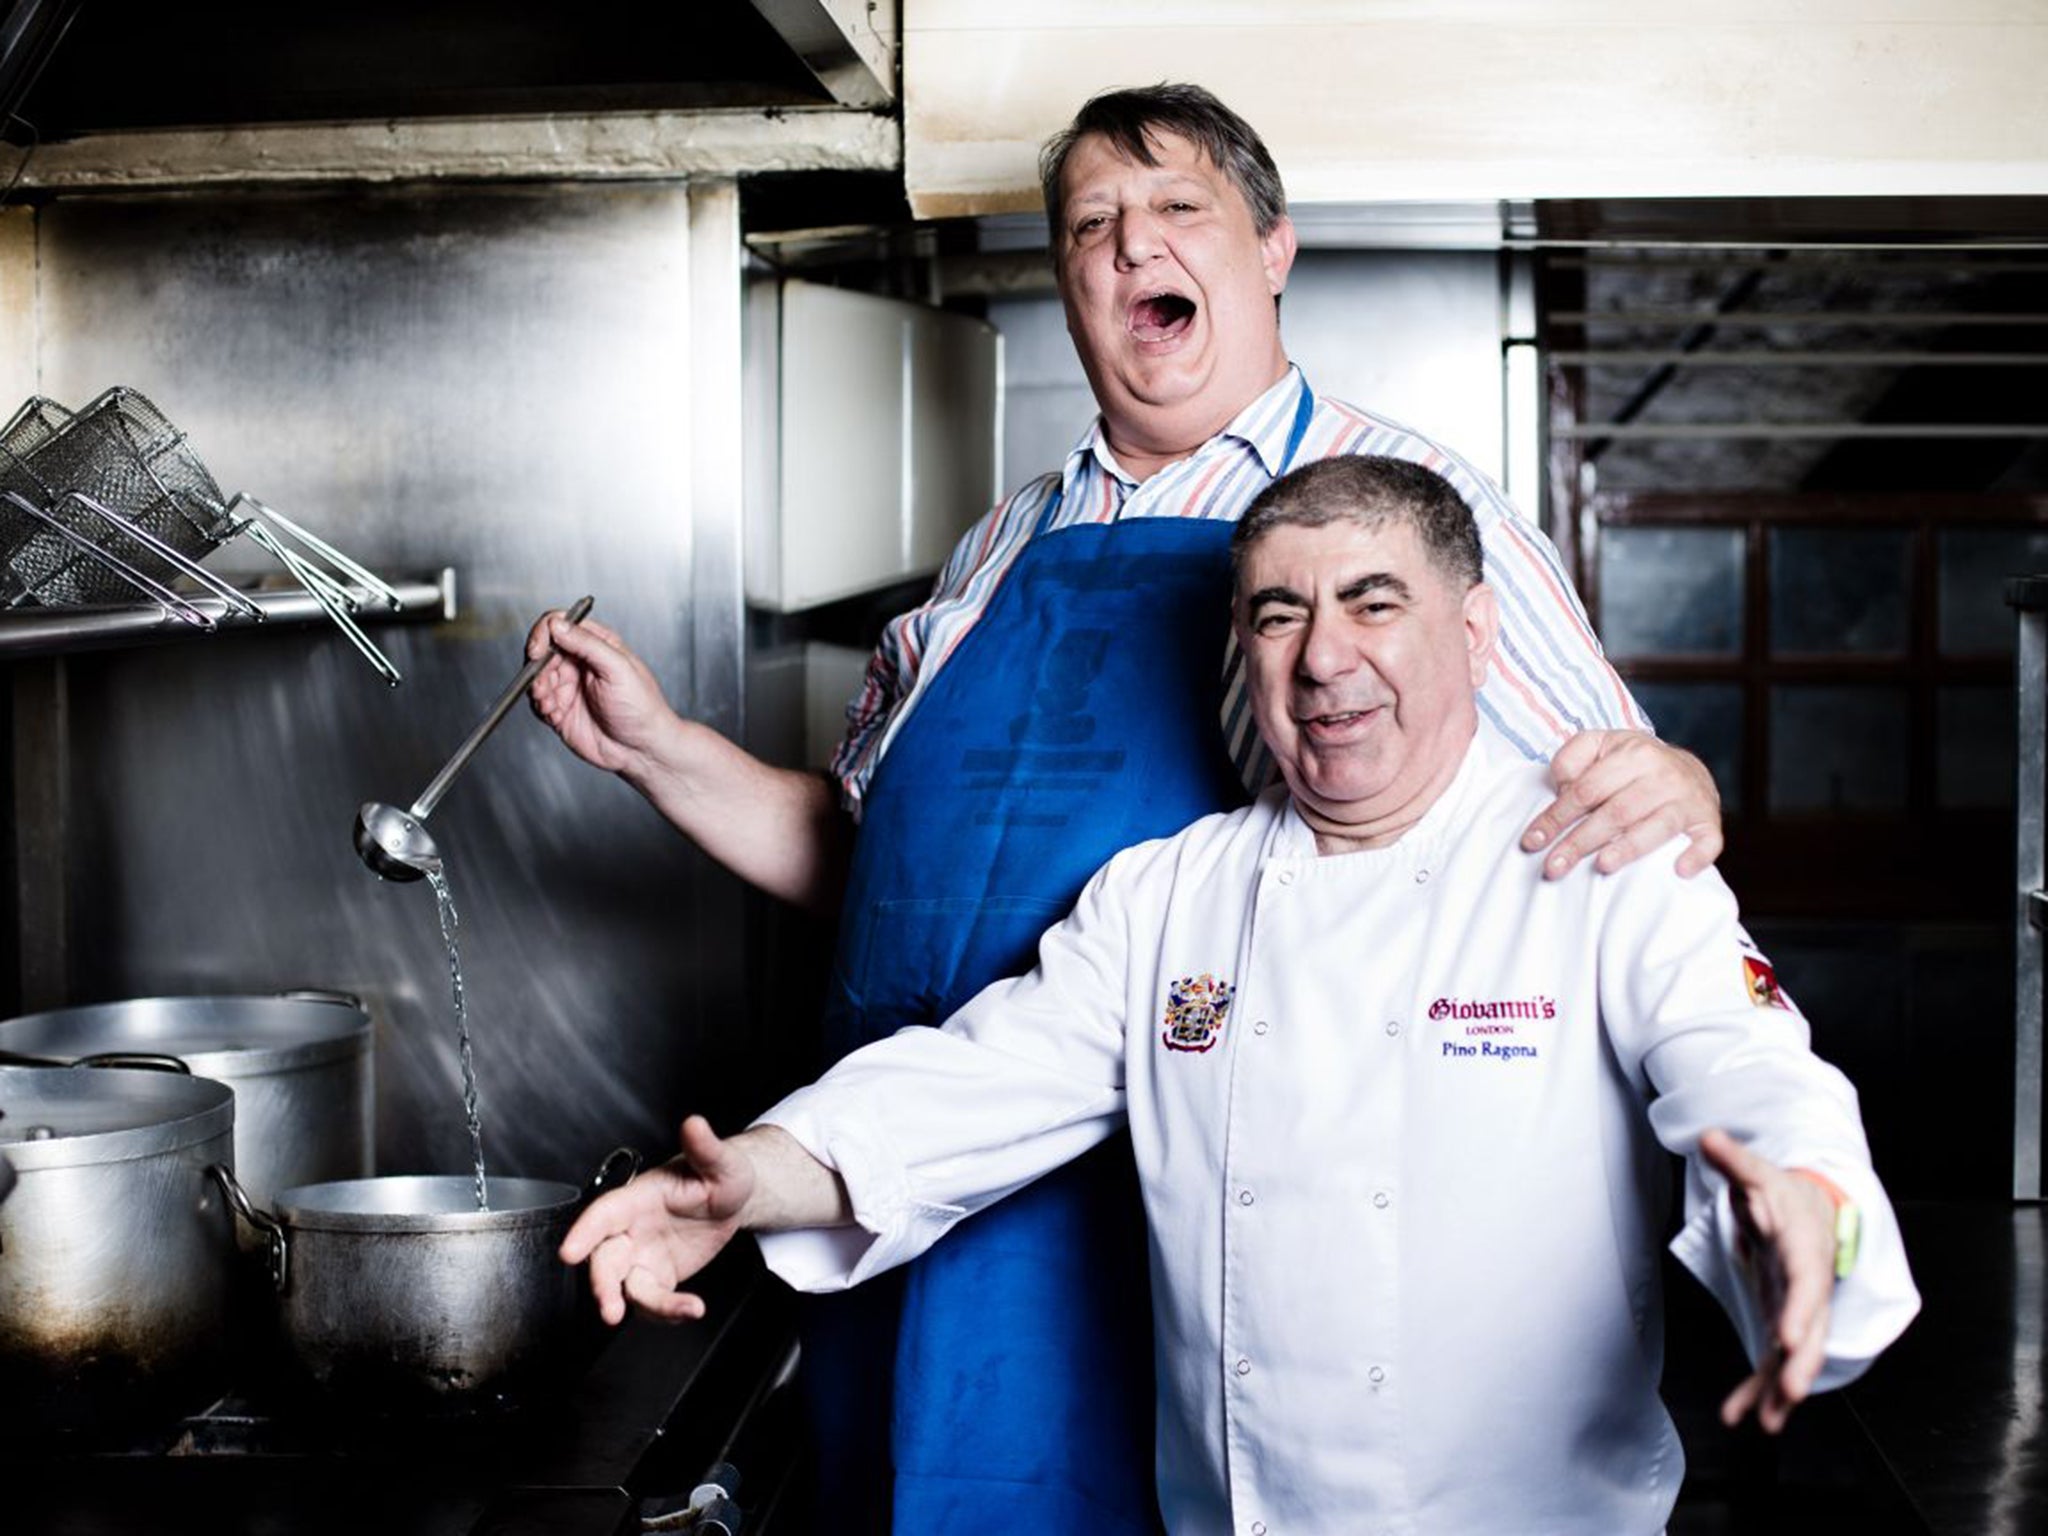 Ambrogio Maestri, left, clowning at Giovanni’s in Covent Garden